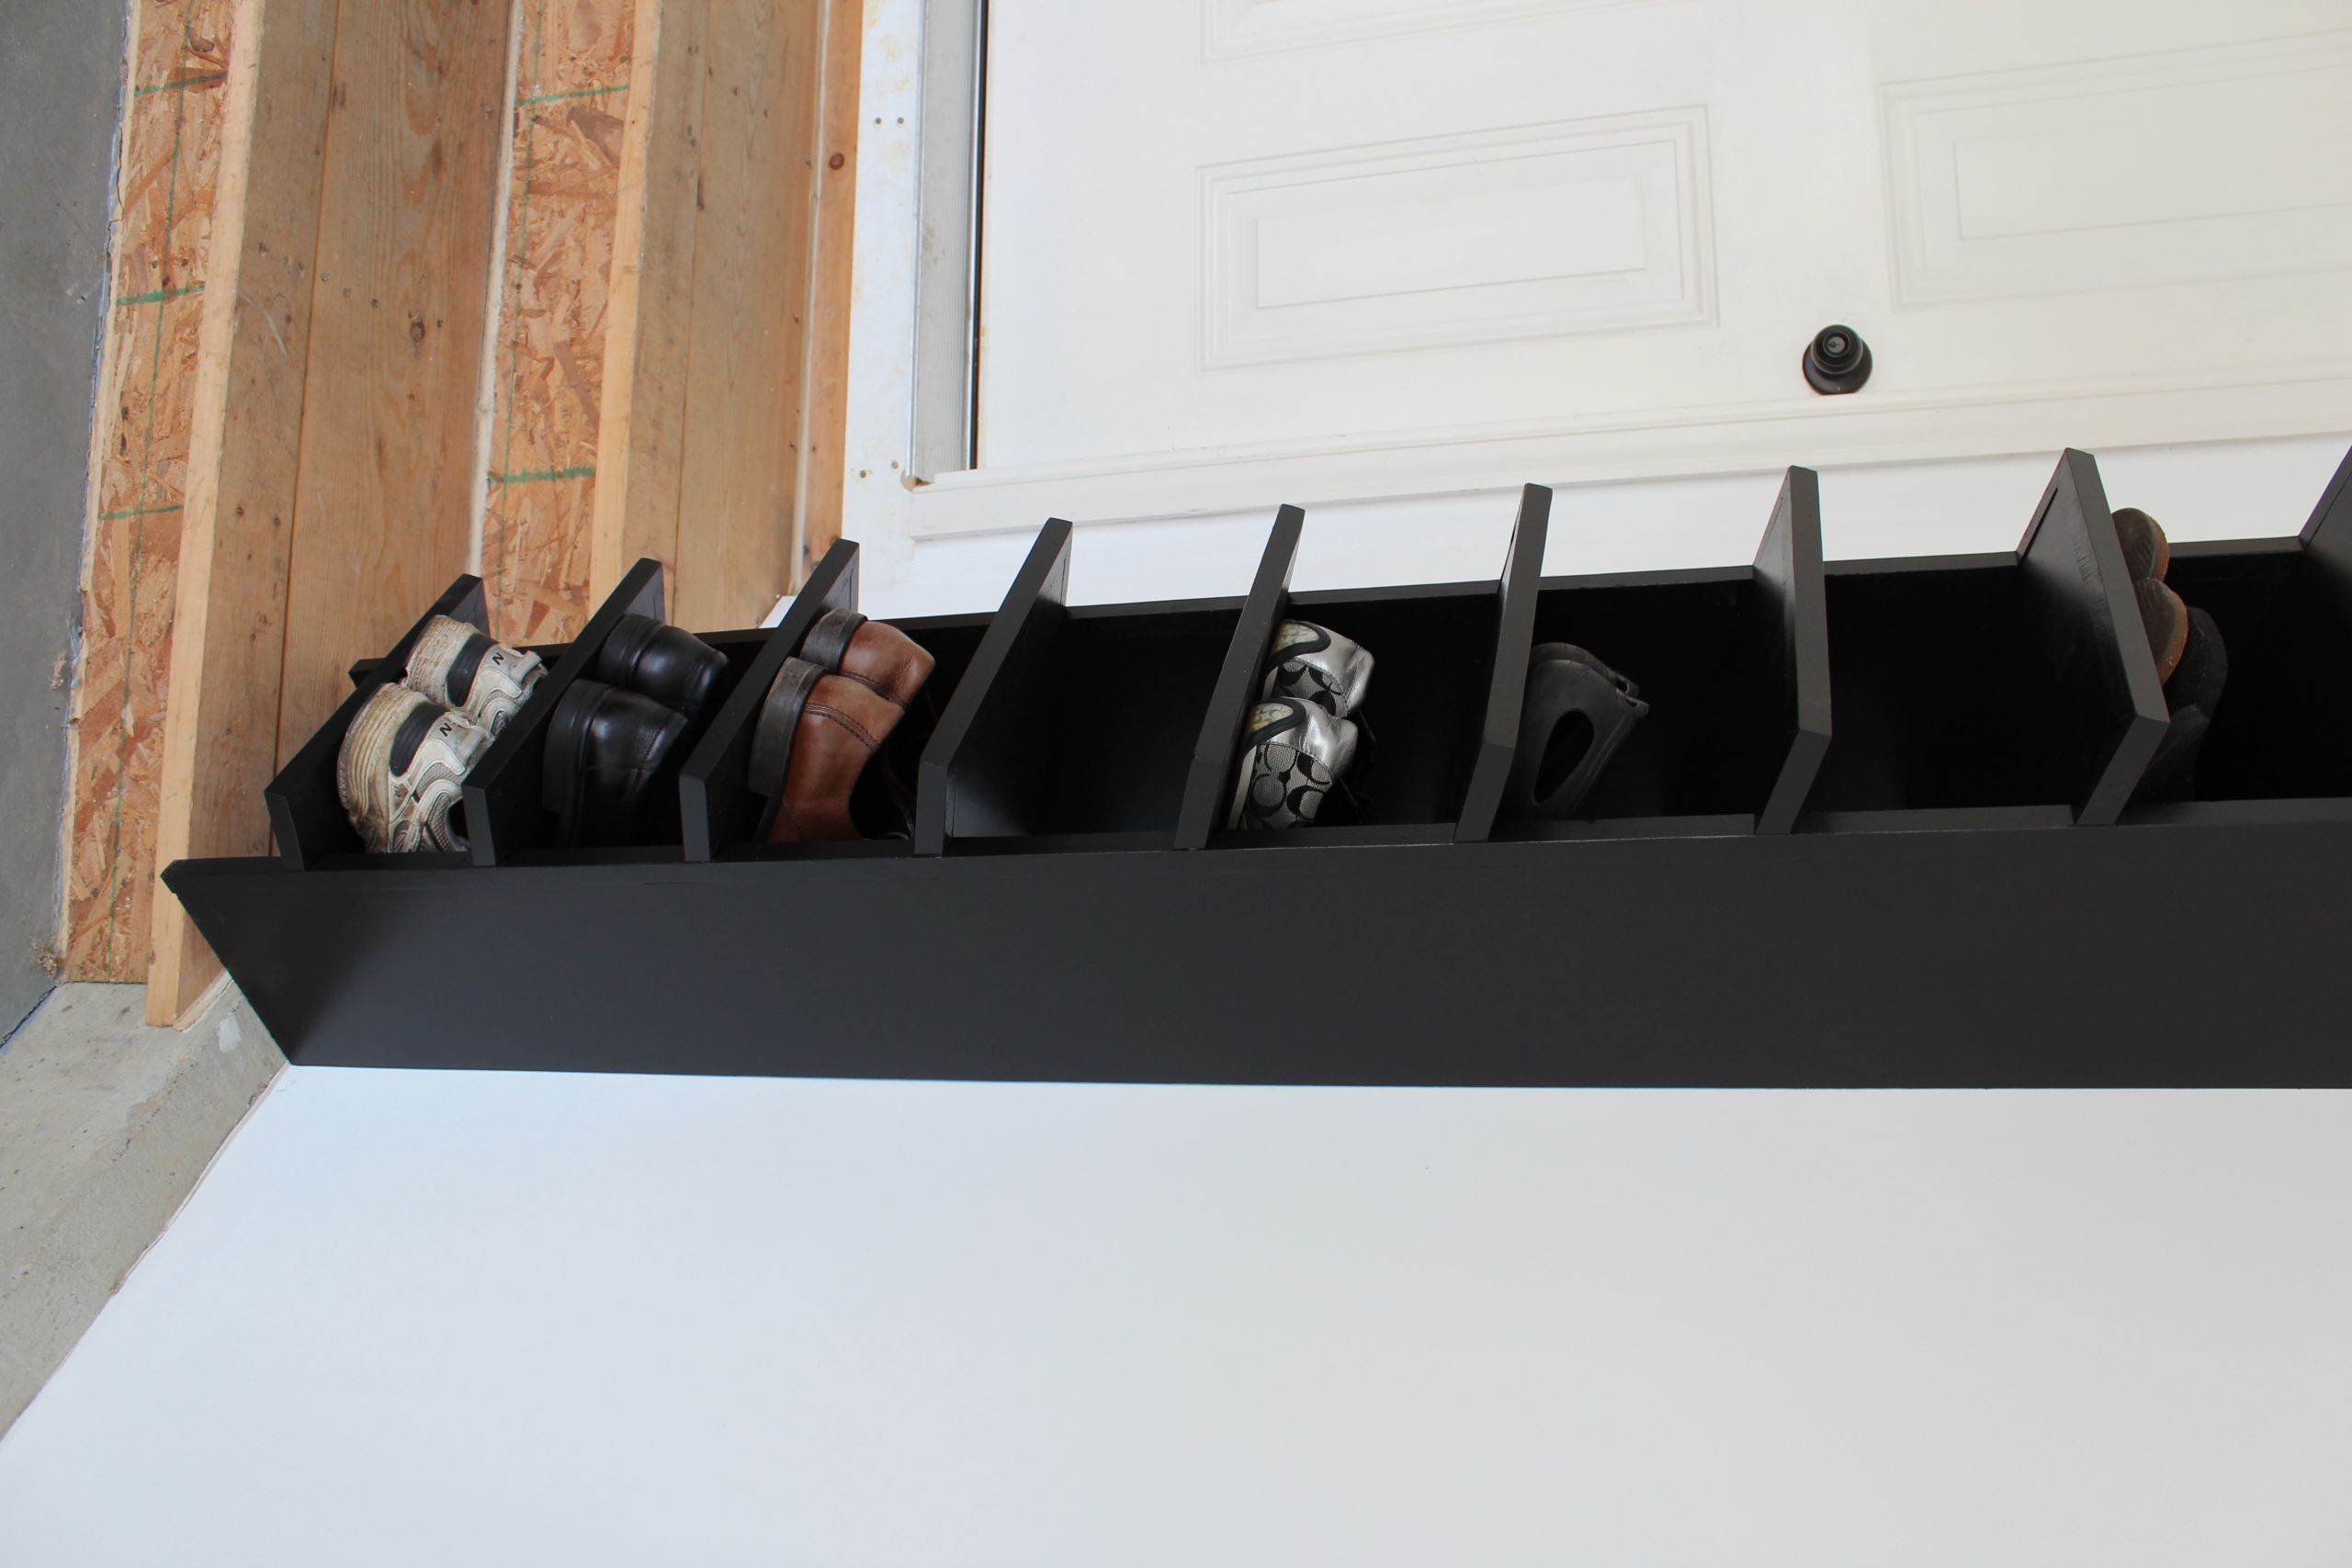 Garage Shoe Organizers
 Our Home From Scratch